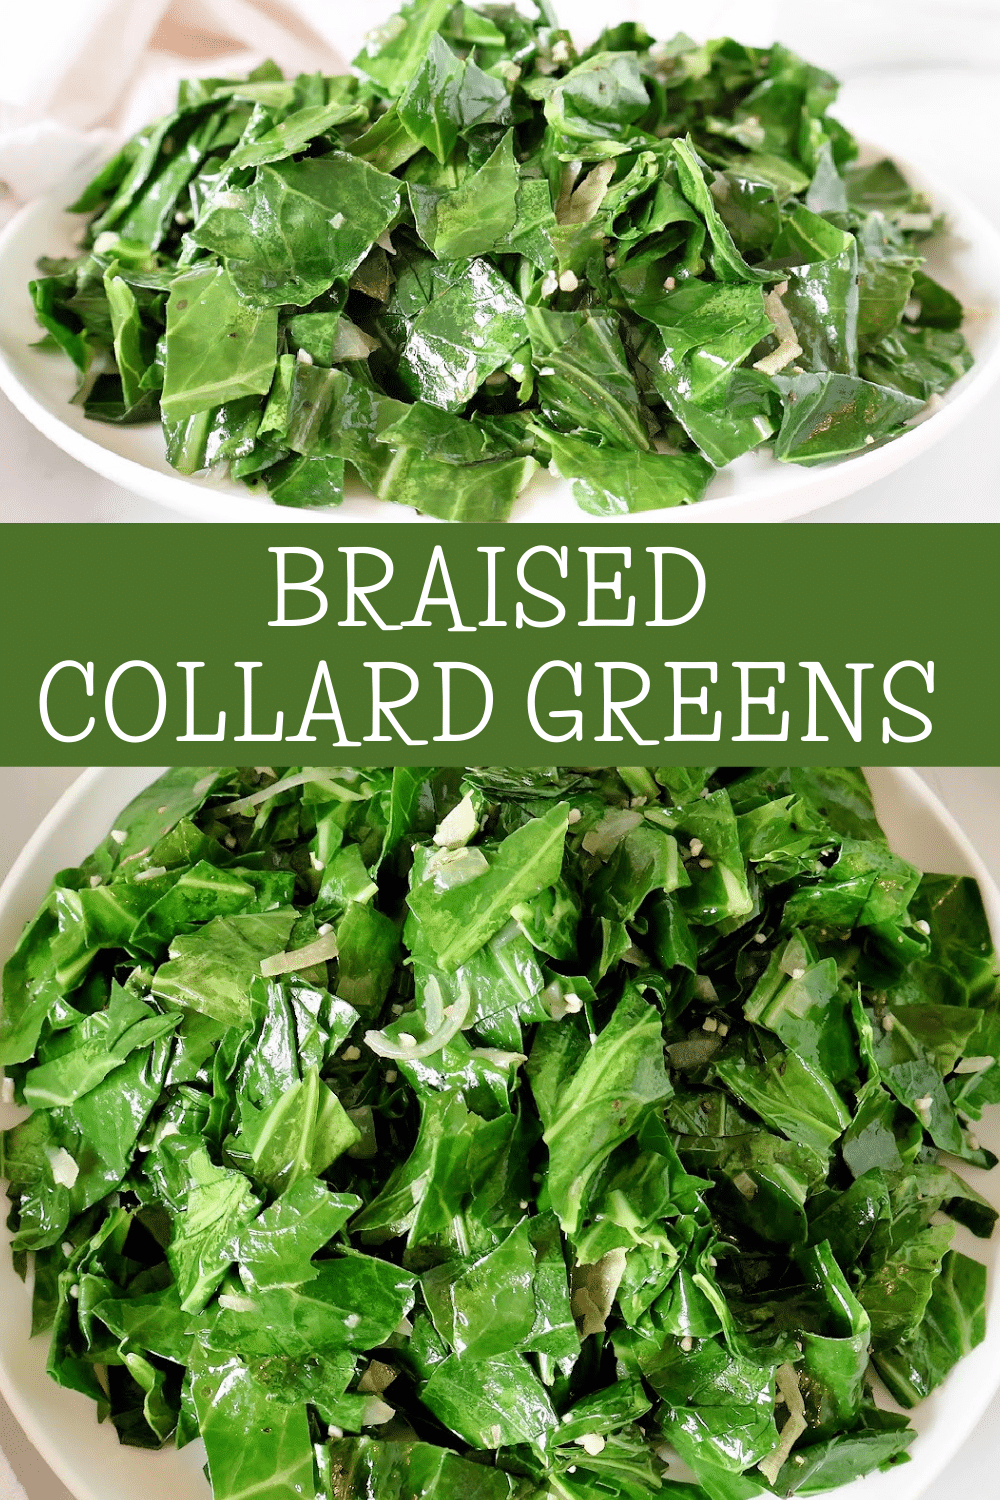 Braised Collard Greens ~ Southern-style greens slow-simmered with lots of garlic, onions, and simple seasonings. Vegetarian and vegan. via @thiswifecooks